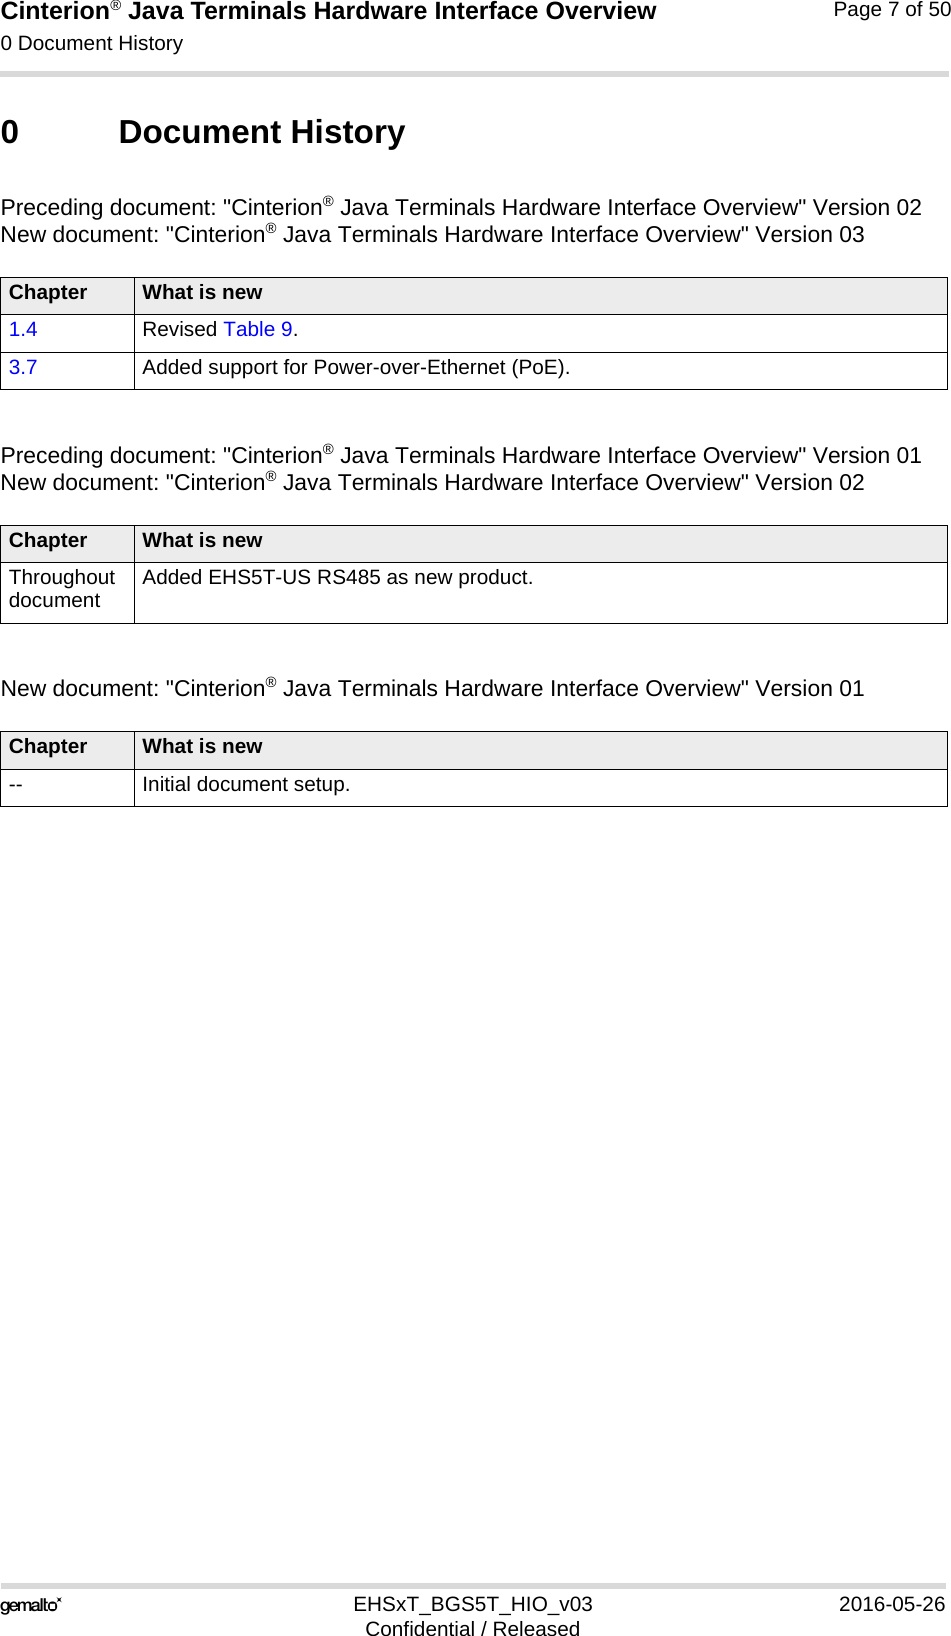 Cinterion® Java Terminals Hardware Interface Overview0 Document History7EHSxT_BGS5T_HIO_v03 2016-05-26Confidential / ReleasedPage 7 of 500 Document HistoryPreceding document: &quot;Cinterion® Java Terminals Hardware Interface Overview&quot; Version 02New document: &quot;Cinterion® Java Terminals Hardware Interface Overview&quot; Version 03Preceding document: &quot;Cinterion® Java Terminals Hardware Interface Overview&quot; Version 01New document: &quot;Cinterion® Java Terminals Hardware Interface Overview&quot; Version 02New document: &quot;Cinterion® Java Terminals Hardware Interface Overview&quot; Version 01Chapter What is new1.4 Revised Table 9.3.7 Added support for Power-over-Ethernet (PoE).Chapter What is newThroughout document Added EHS5T-US RS485 as new product.Chapter What is new-- Initial document setup.